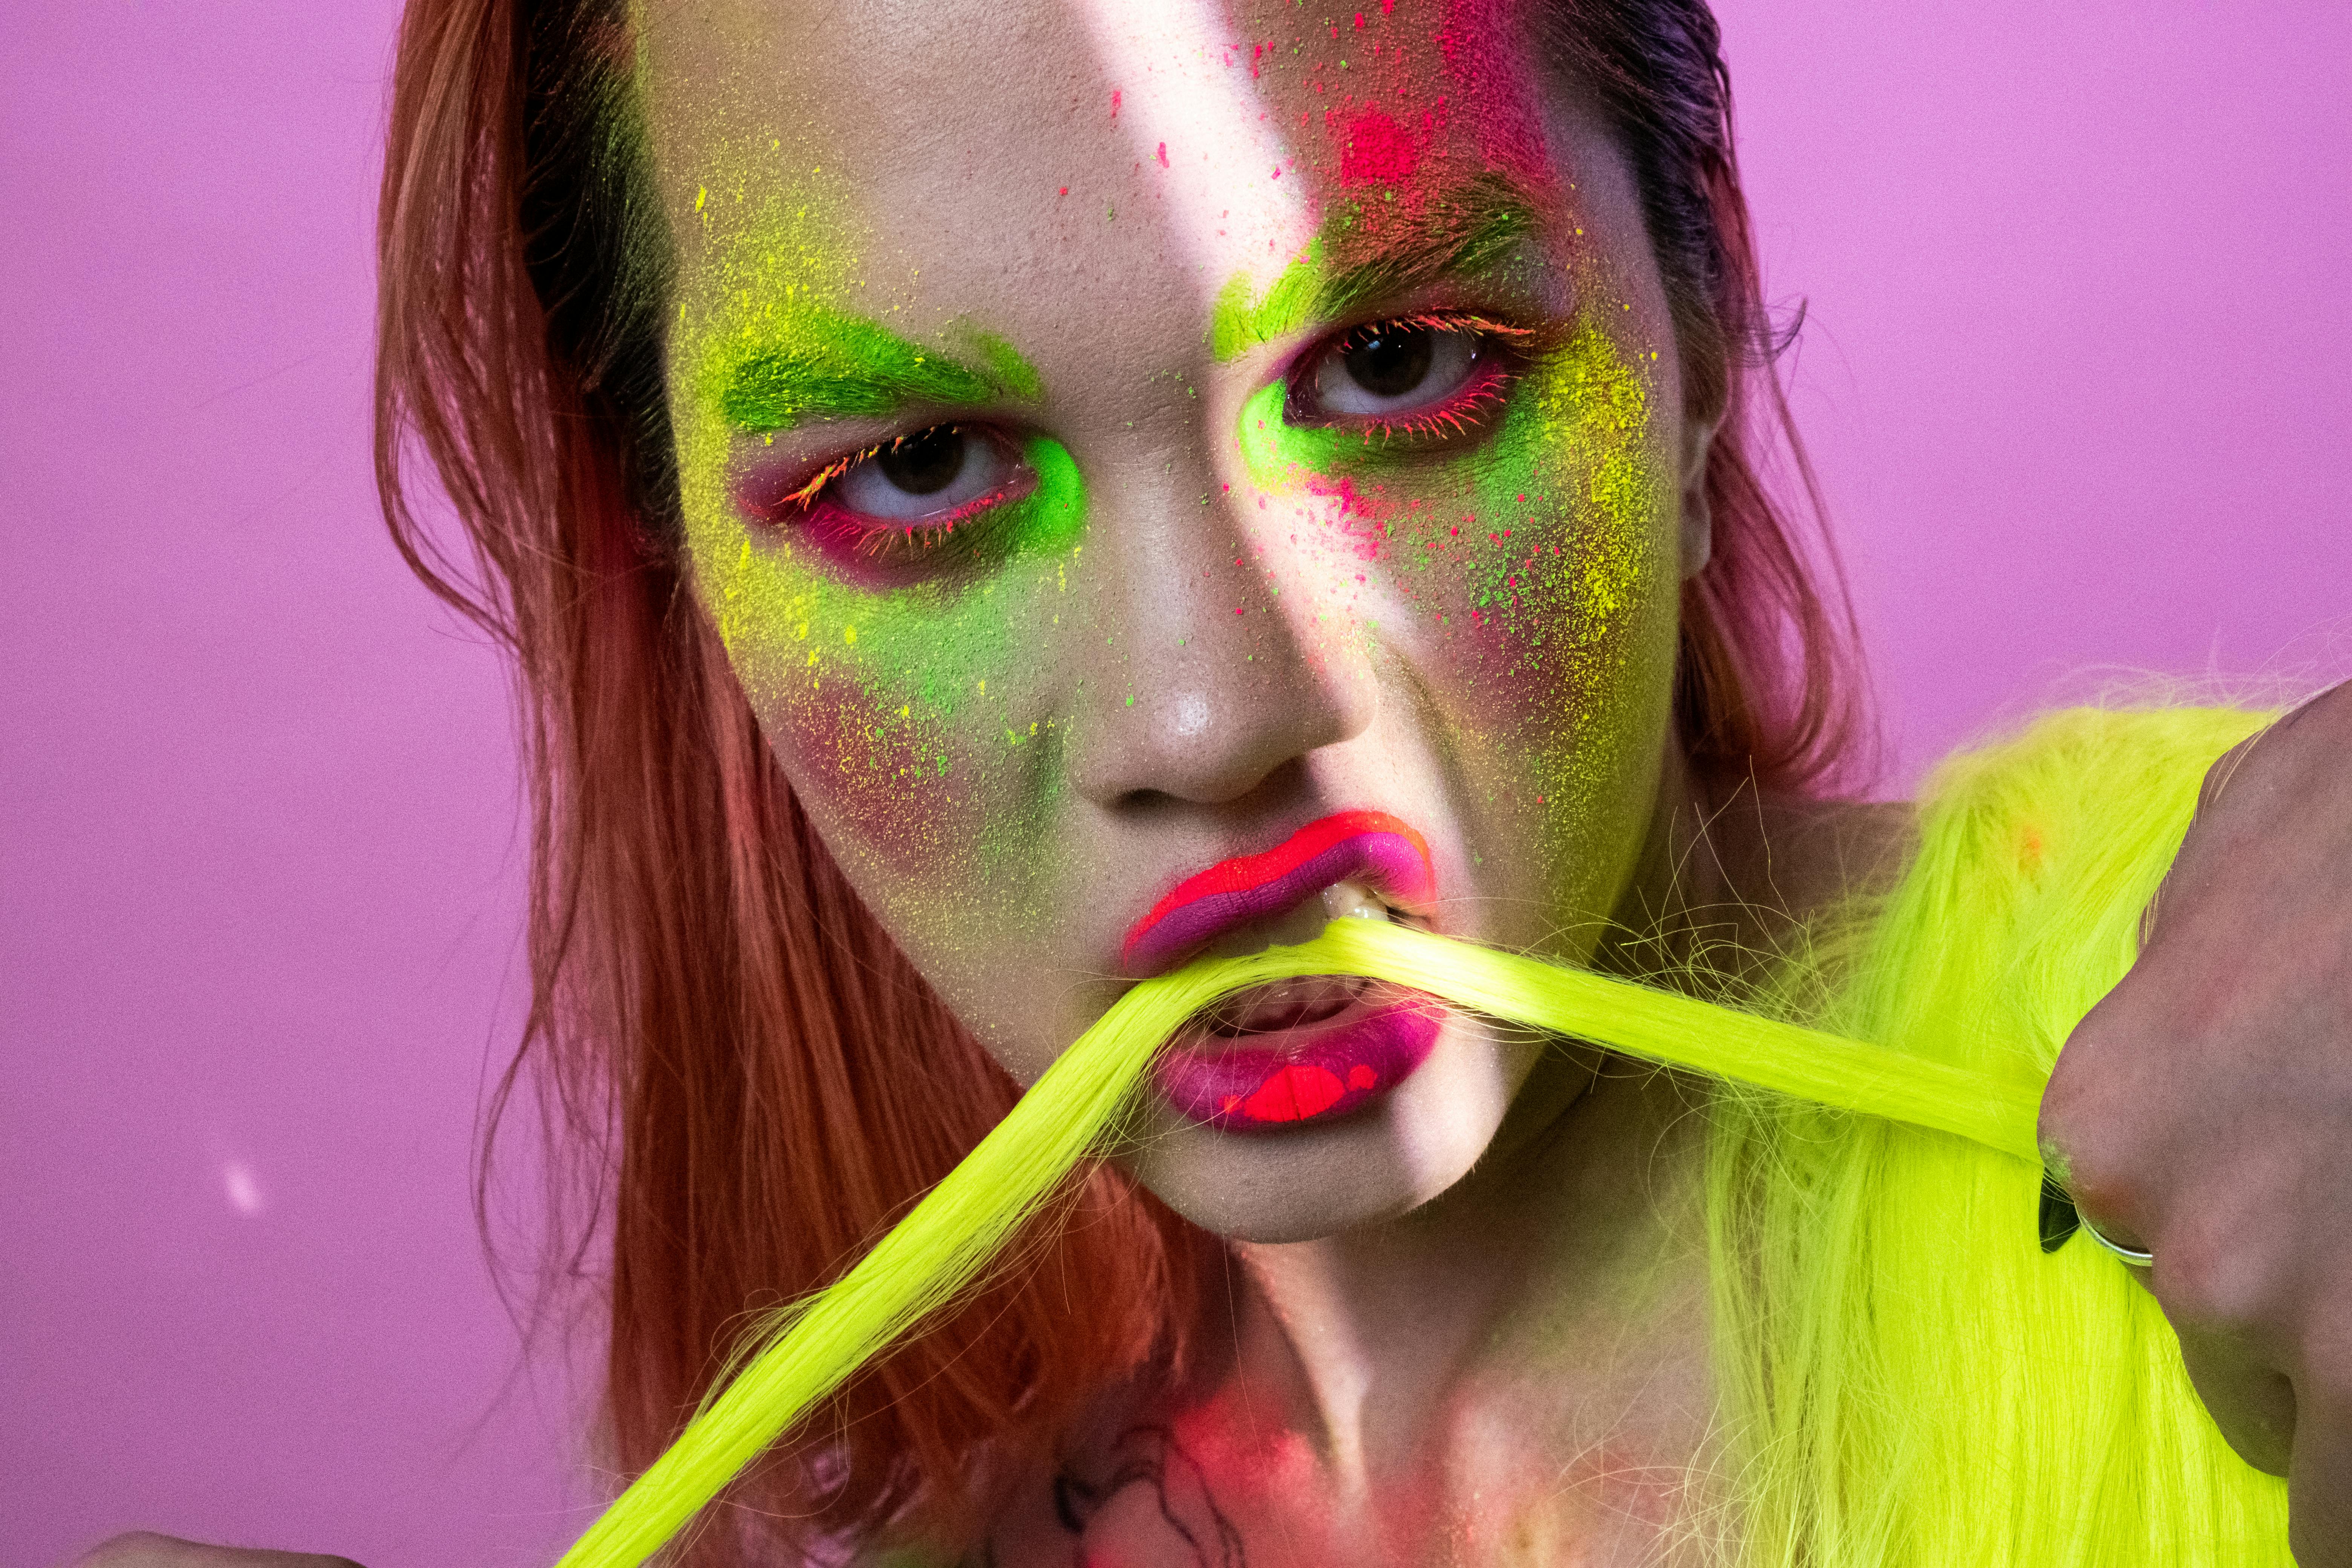 Woman With Green and Pink Face Paint · Free Stock Photo